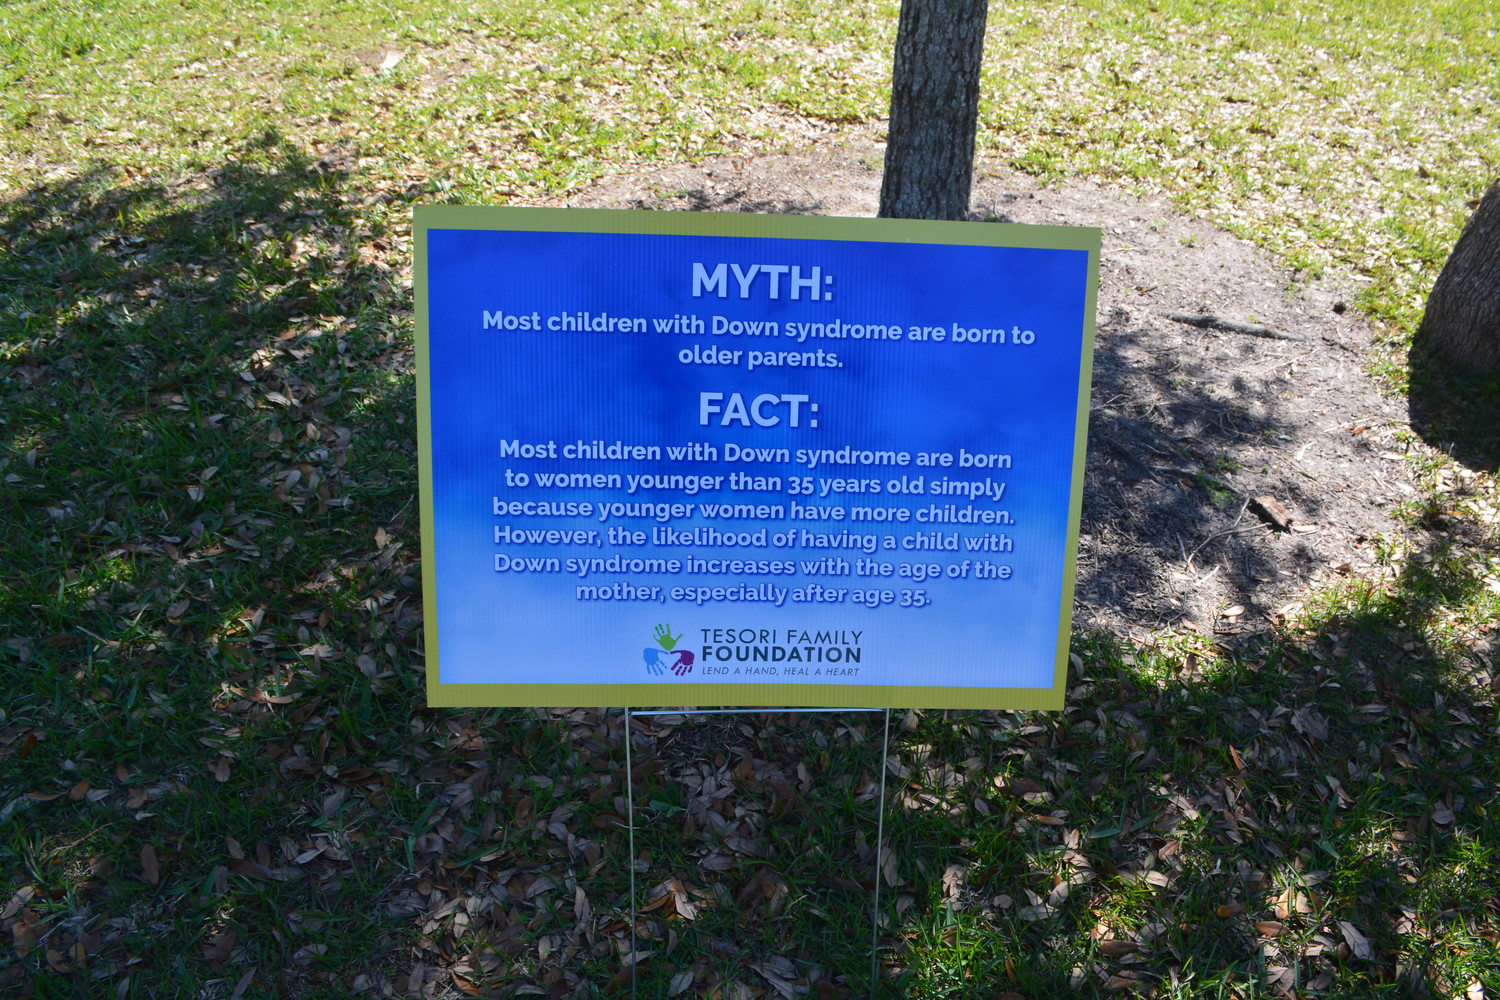 A sign with information on Down syndrome is displayed at the 321 Love Your Neighbor event.